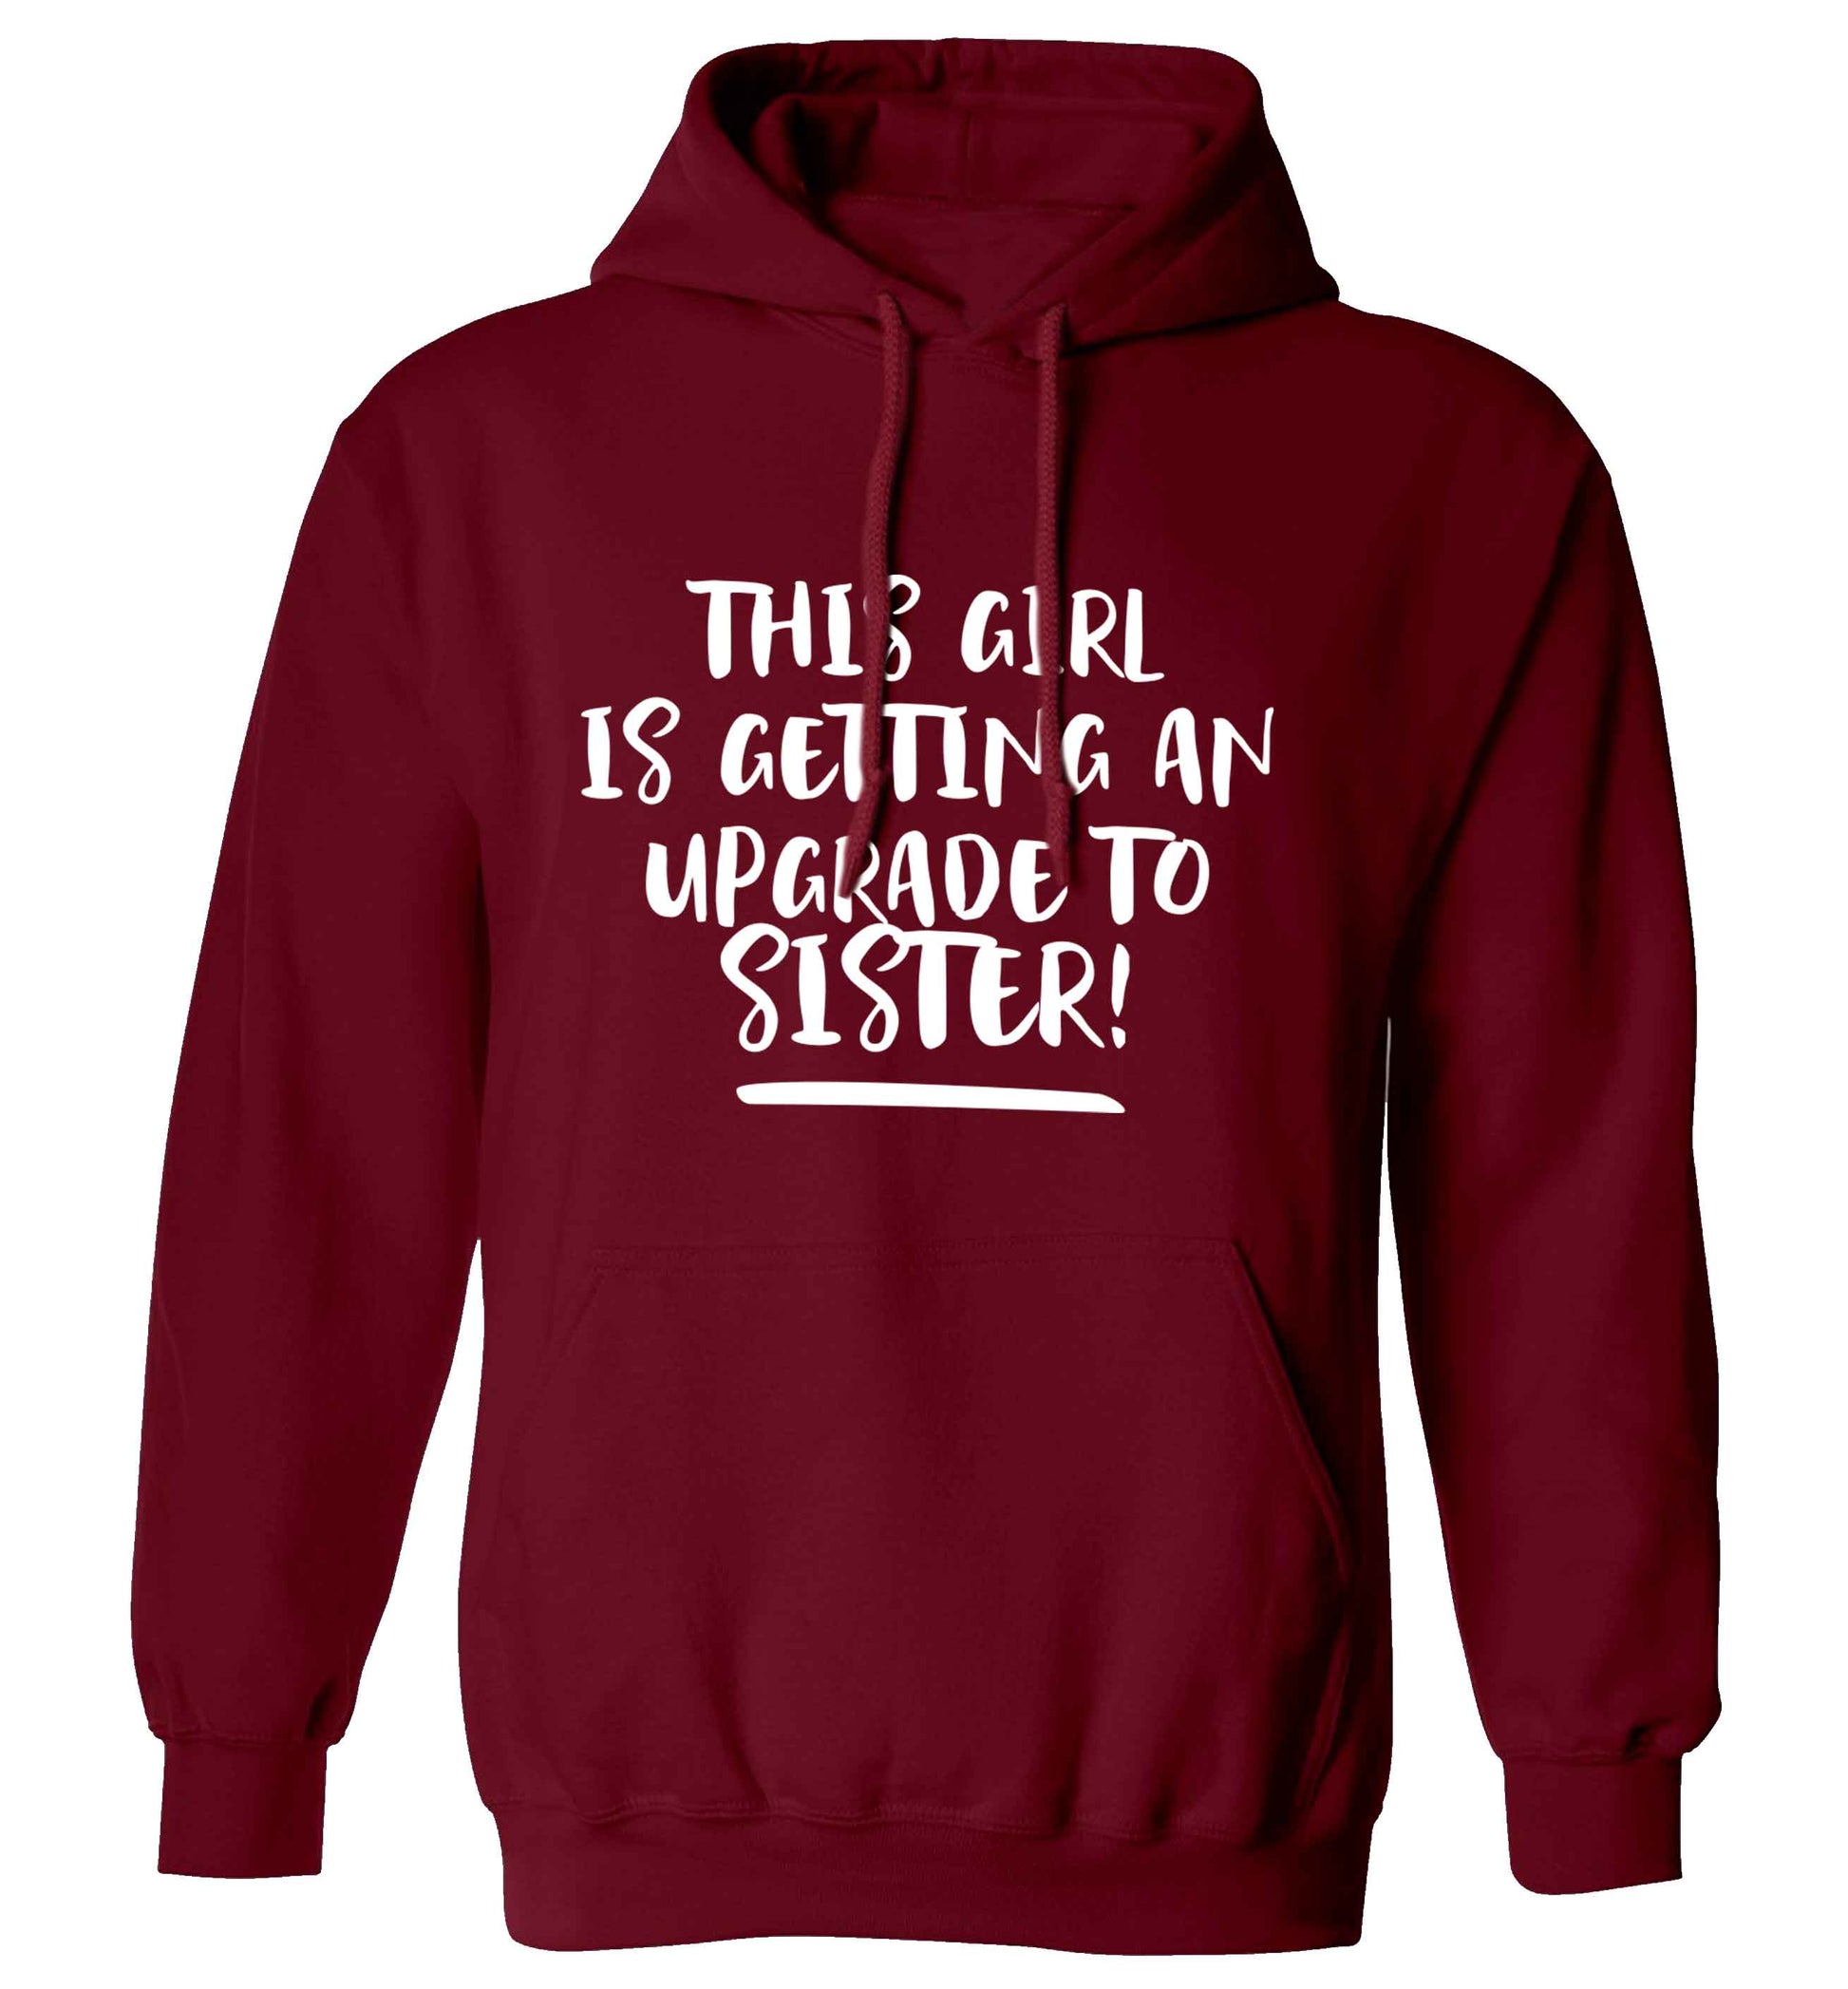 This girl is getting an upgrade to sister! adults unisex maroon hoodie 2XL